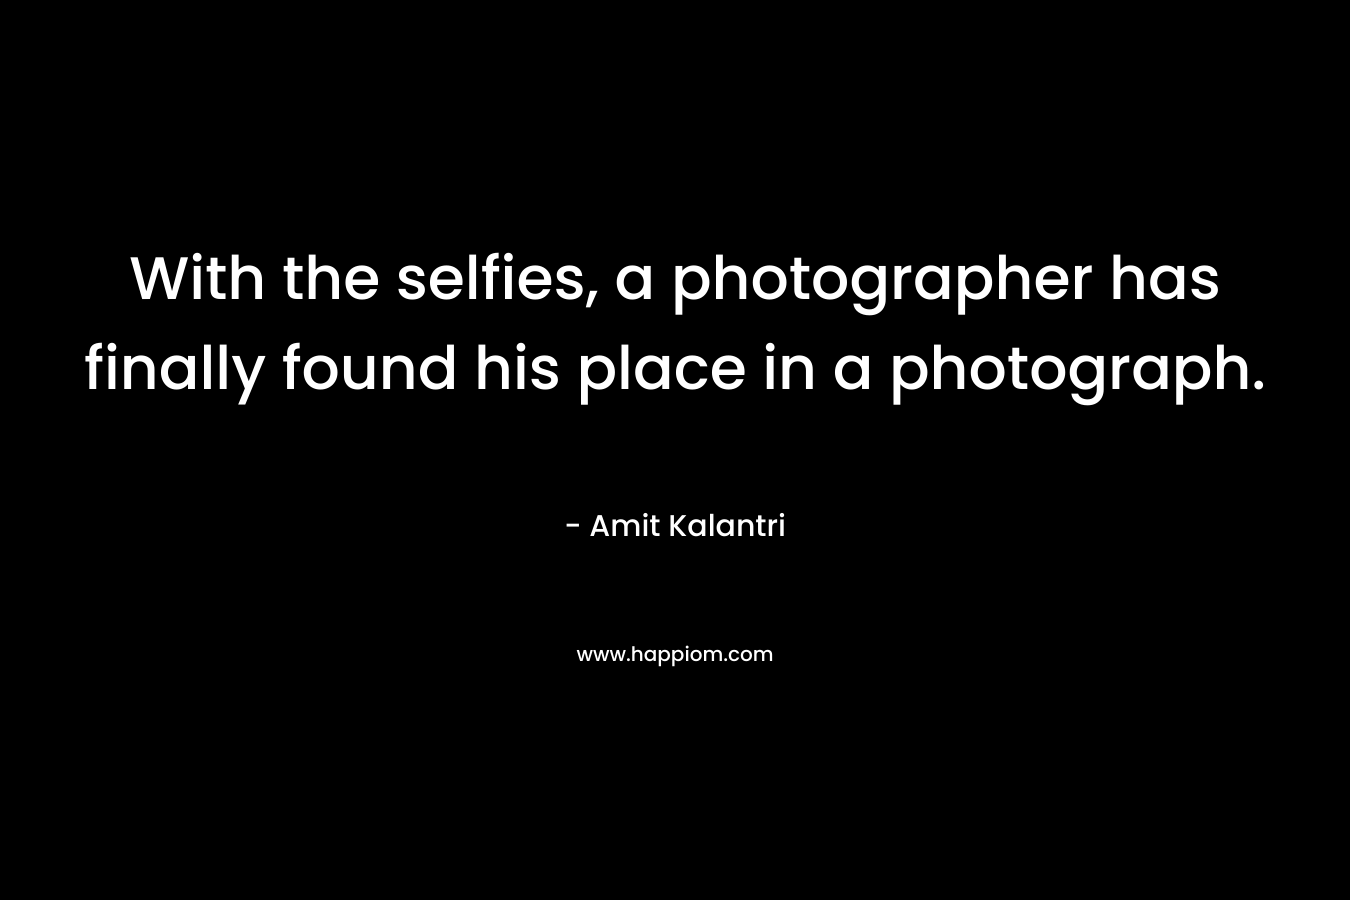 With the selfies, a photographer has finally found his place in a photograph. – Amit Kalantri